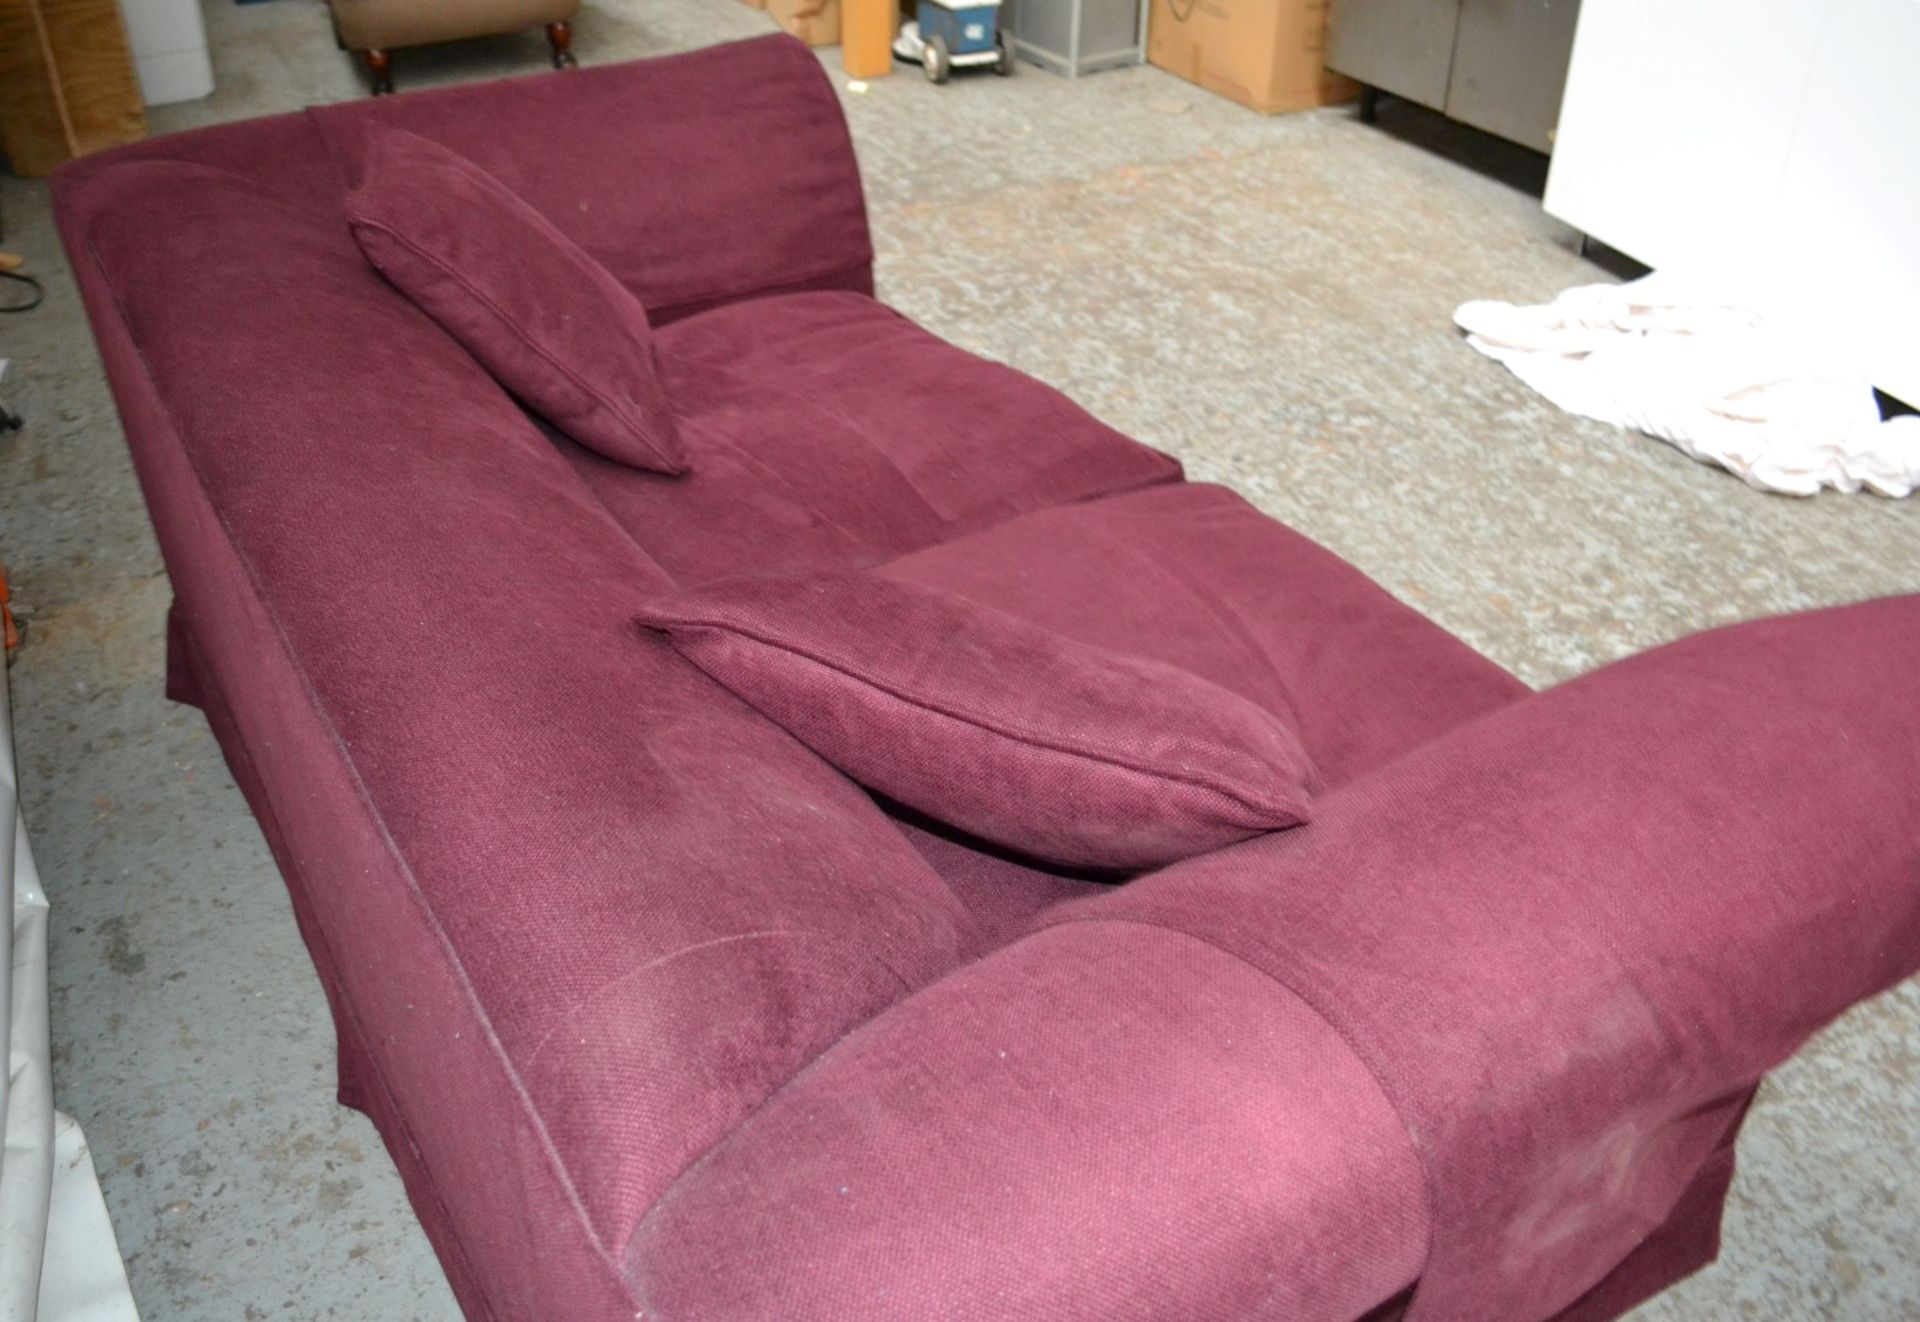 1 x Large Purple Sofa With Arm Covers - CL314 - Location: Altrincham WA14 - *NO VAT On Hammer*<B - Image 7 of 9